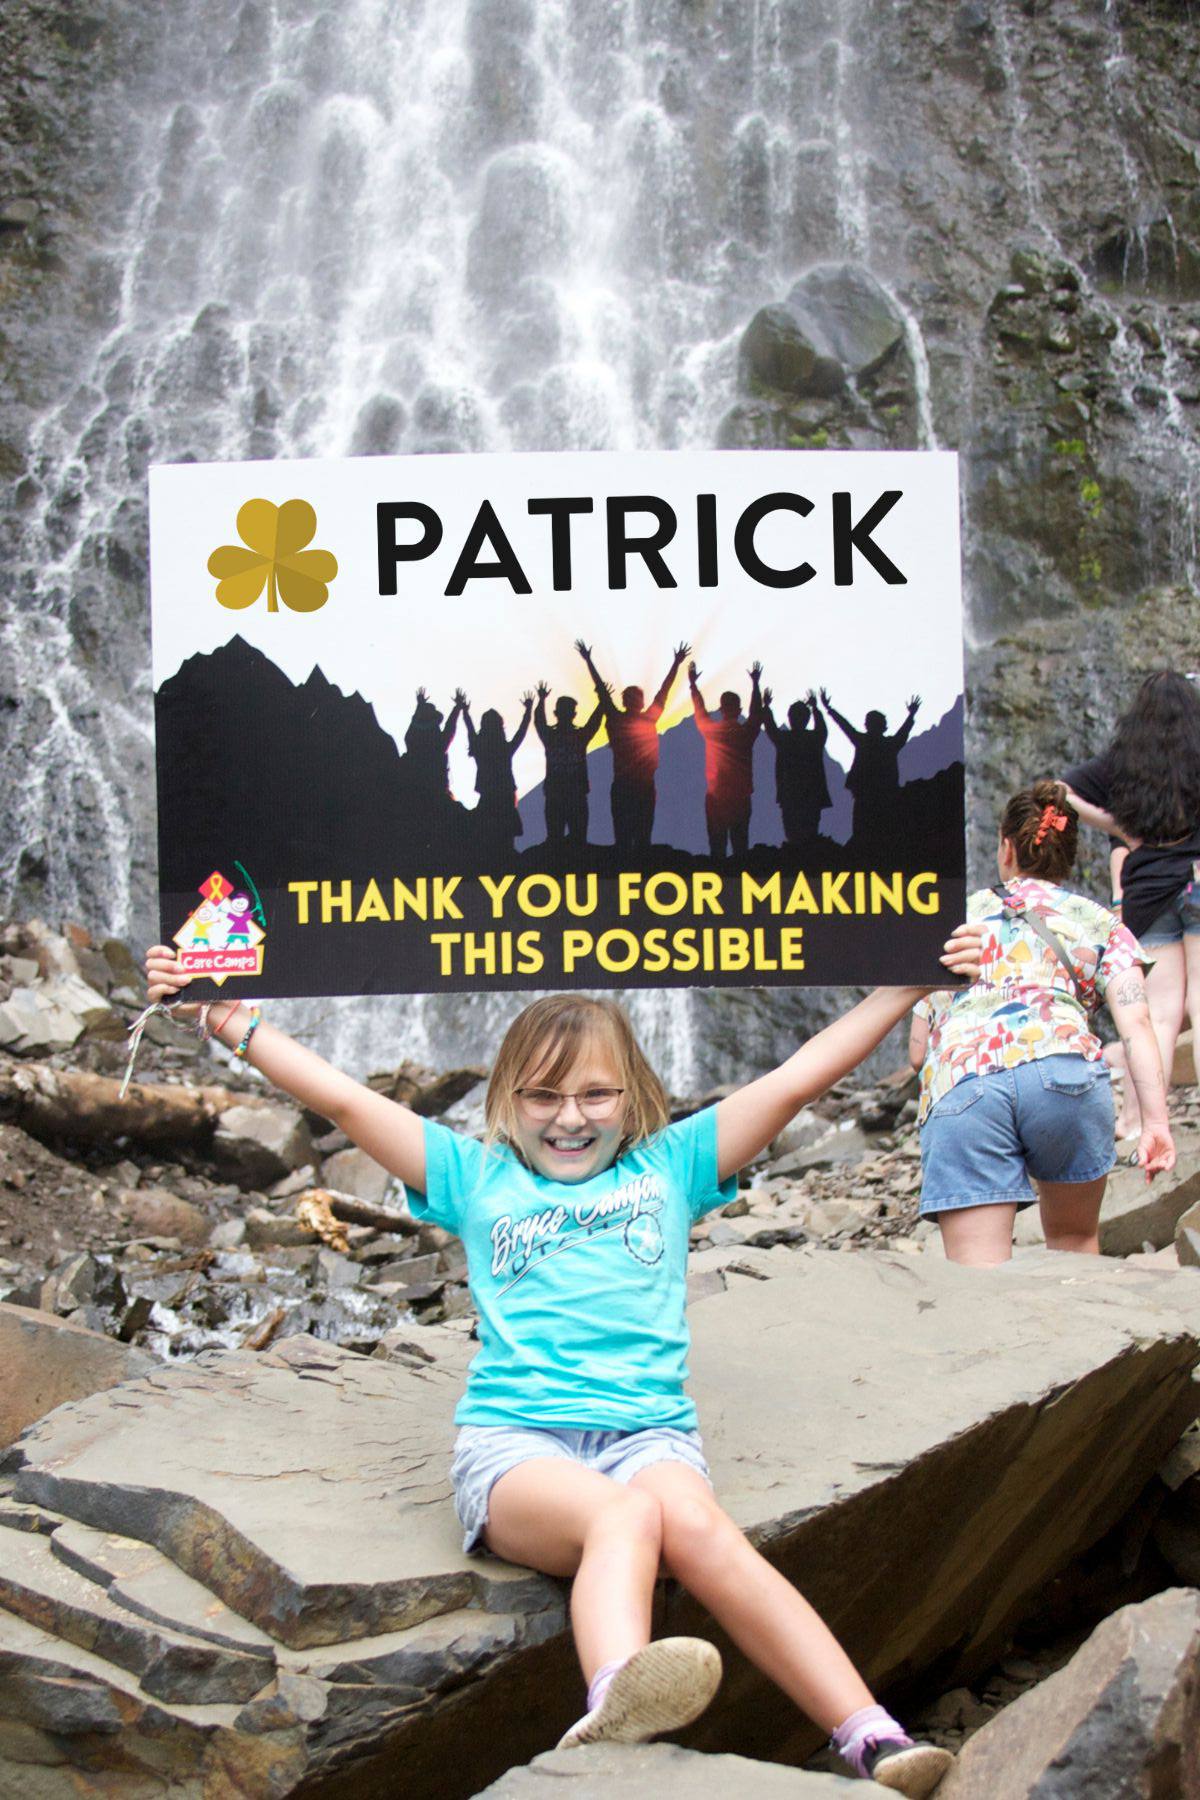 Patrick Industries Increases its Support for Care Camps